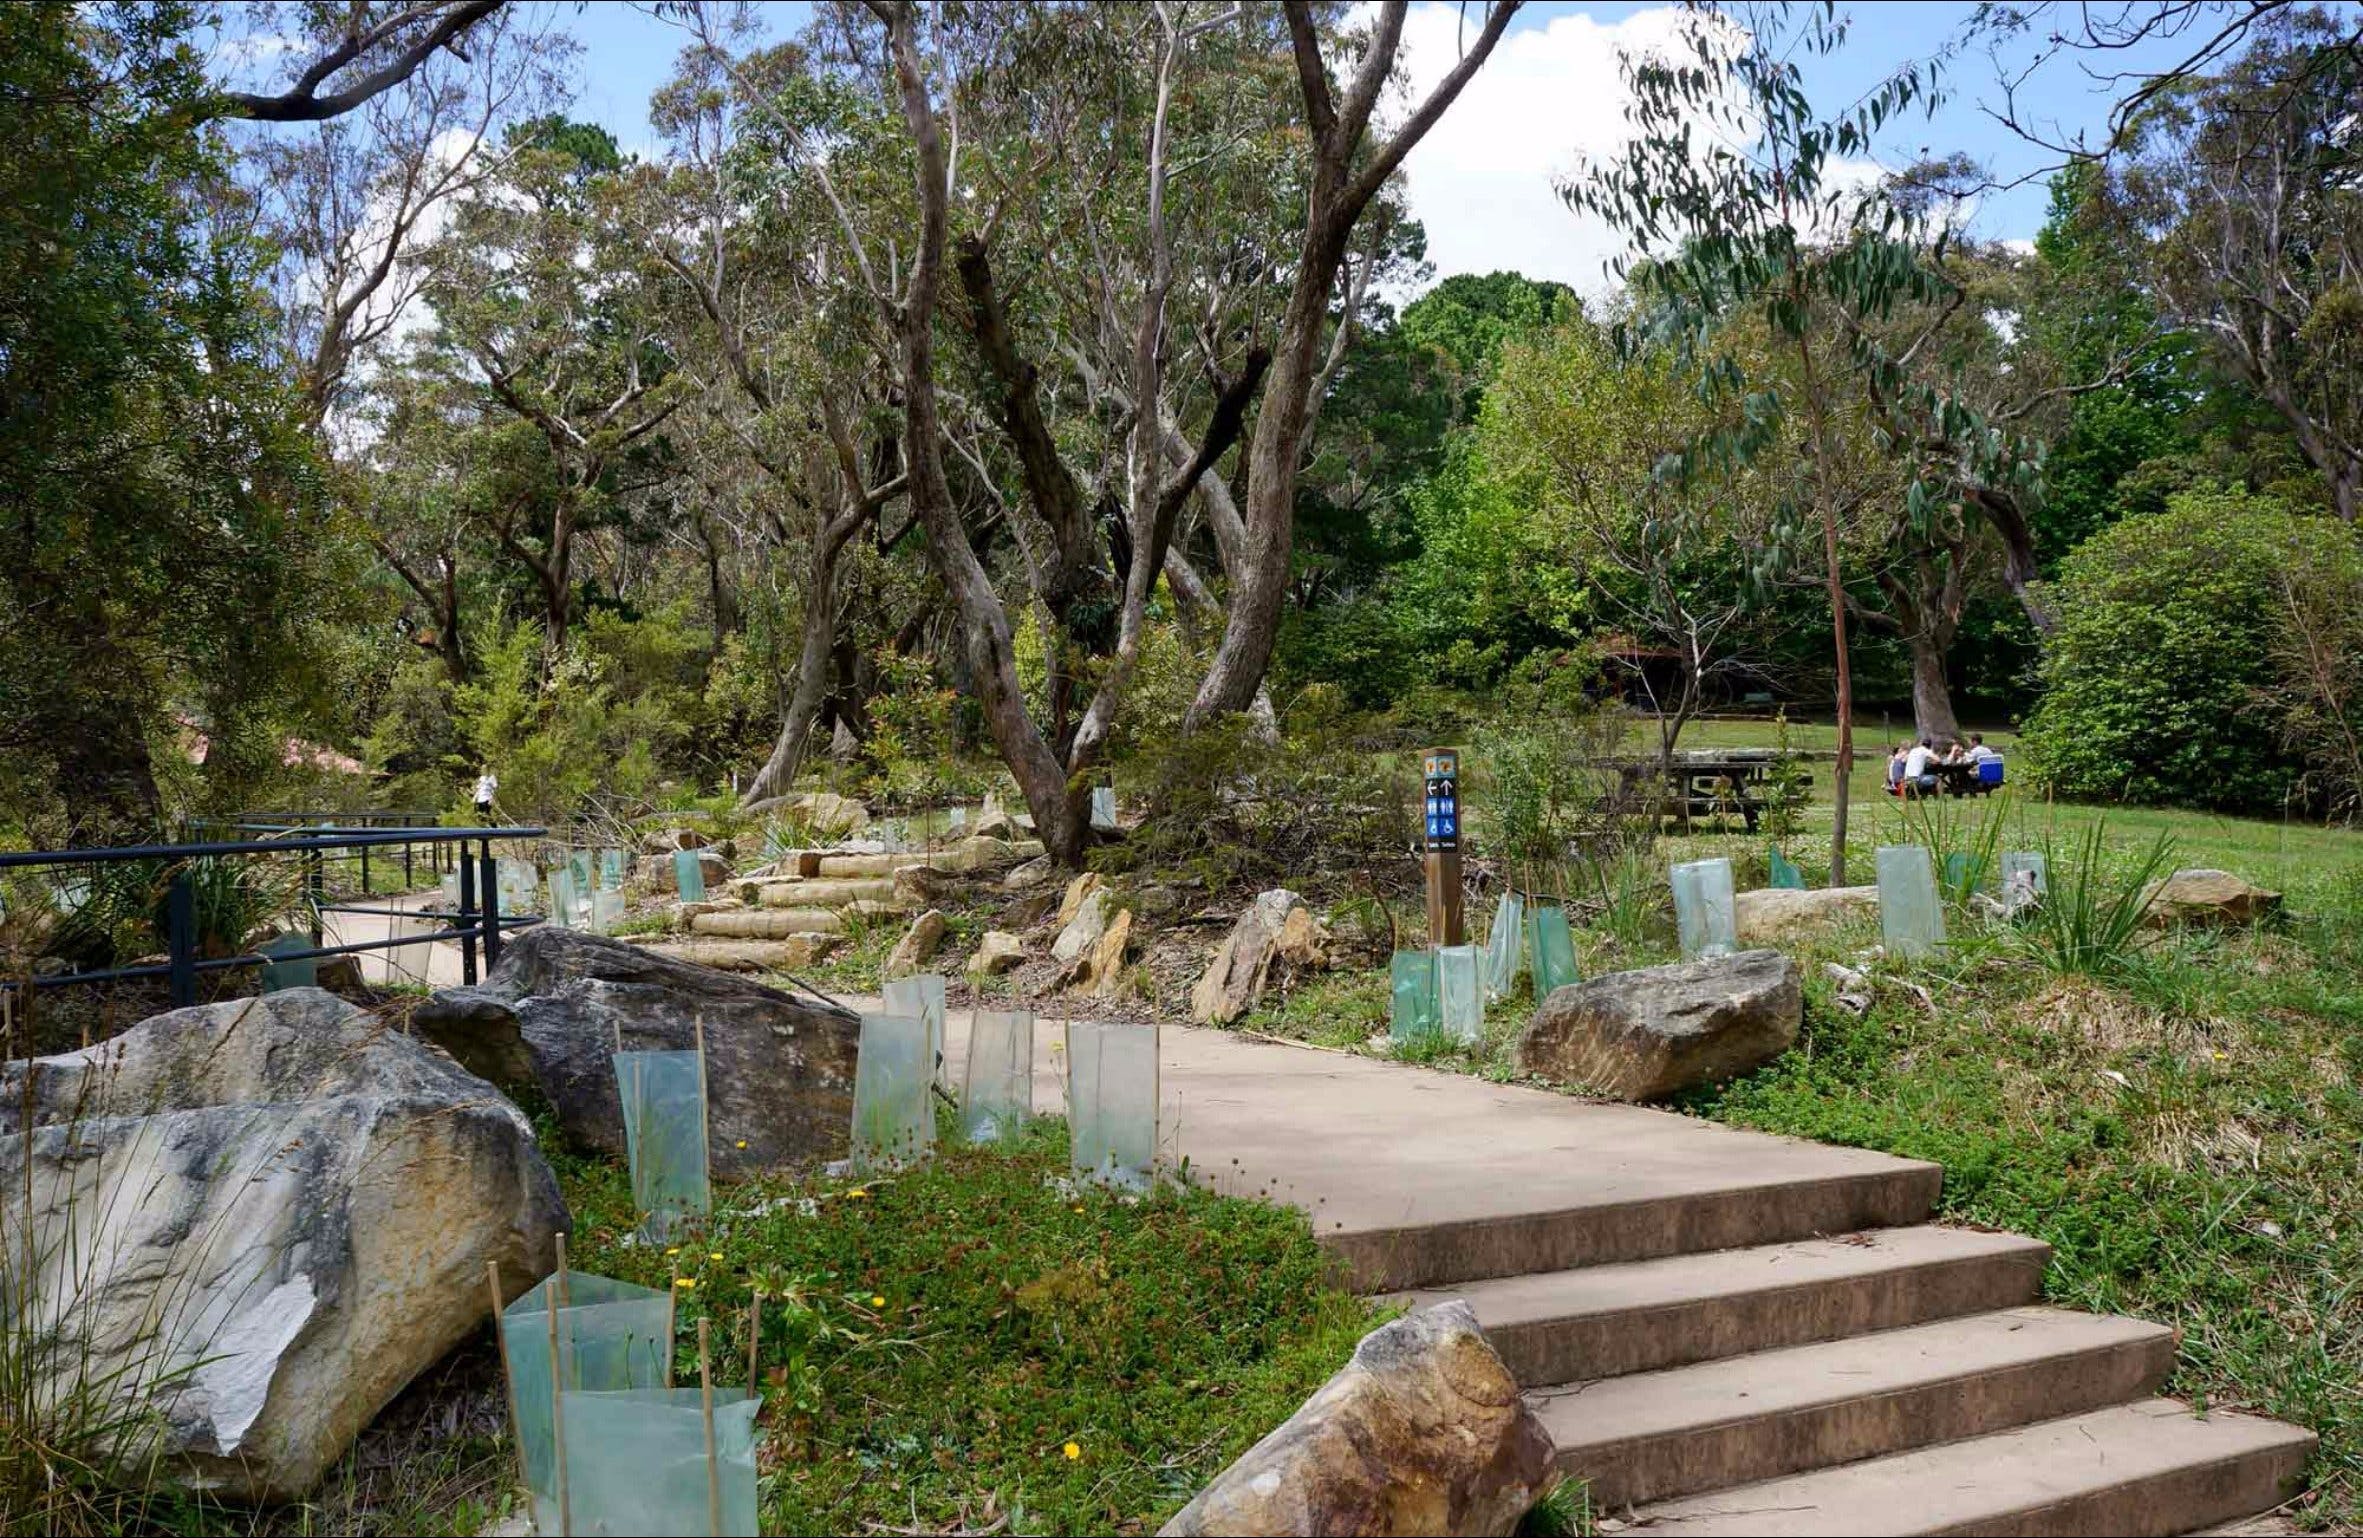 Wentworth Falls picnic area - Tourism Adelaide